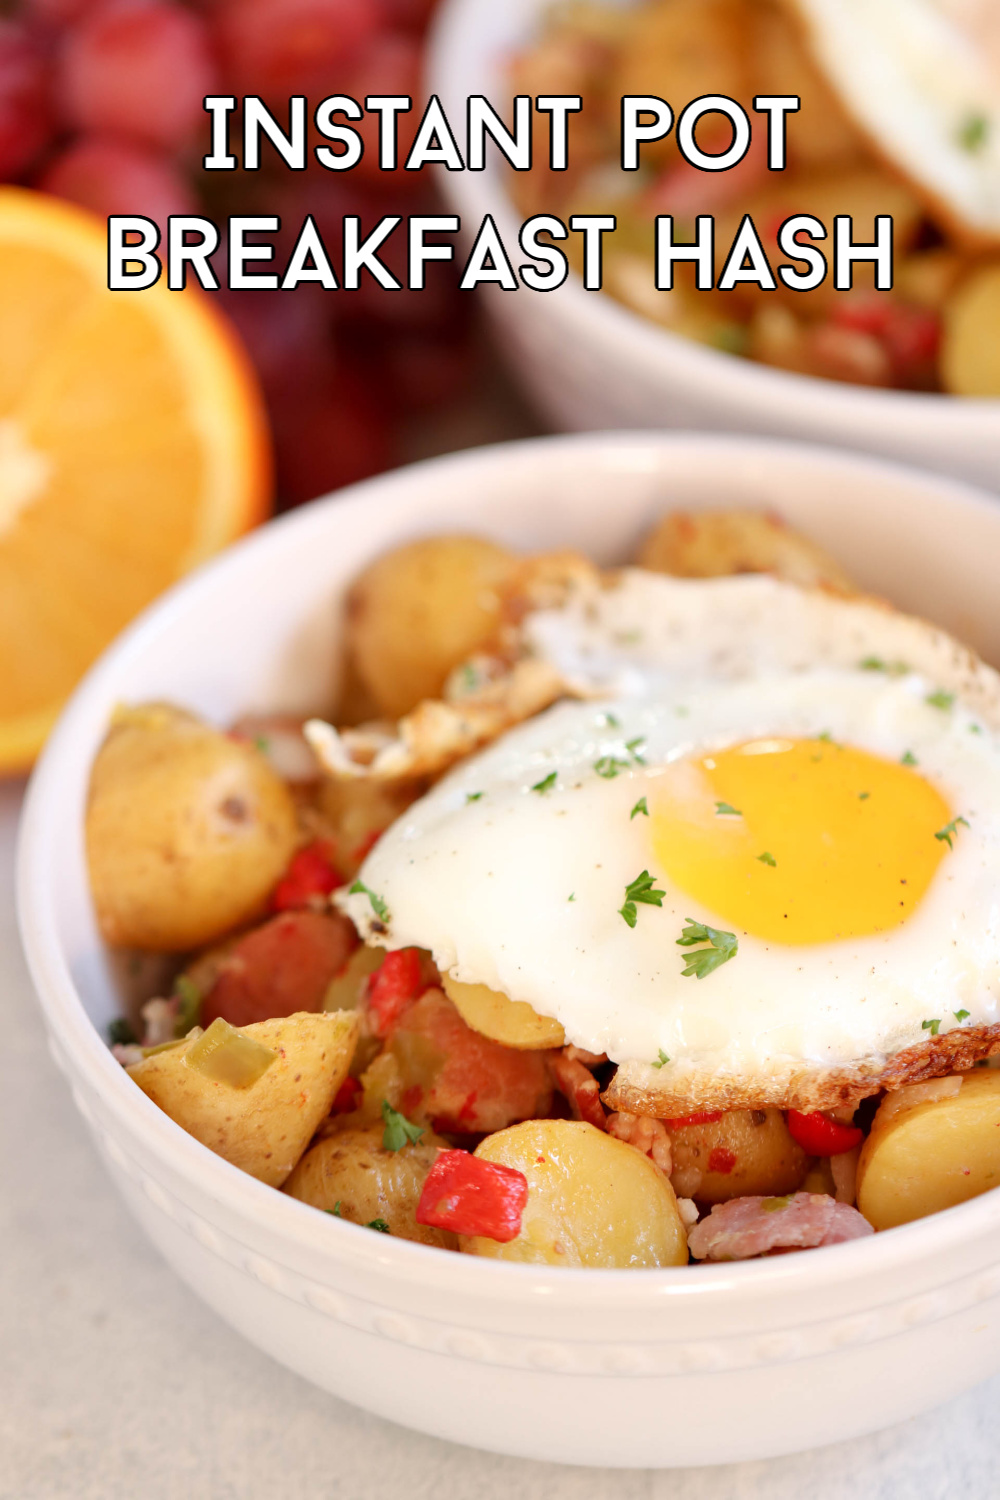 Instant Pot Breakfast Hash in a bowl topped with an egg